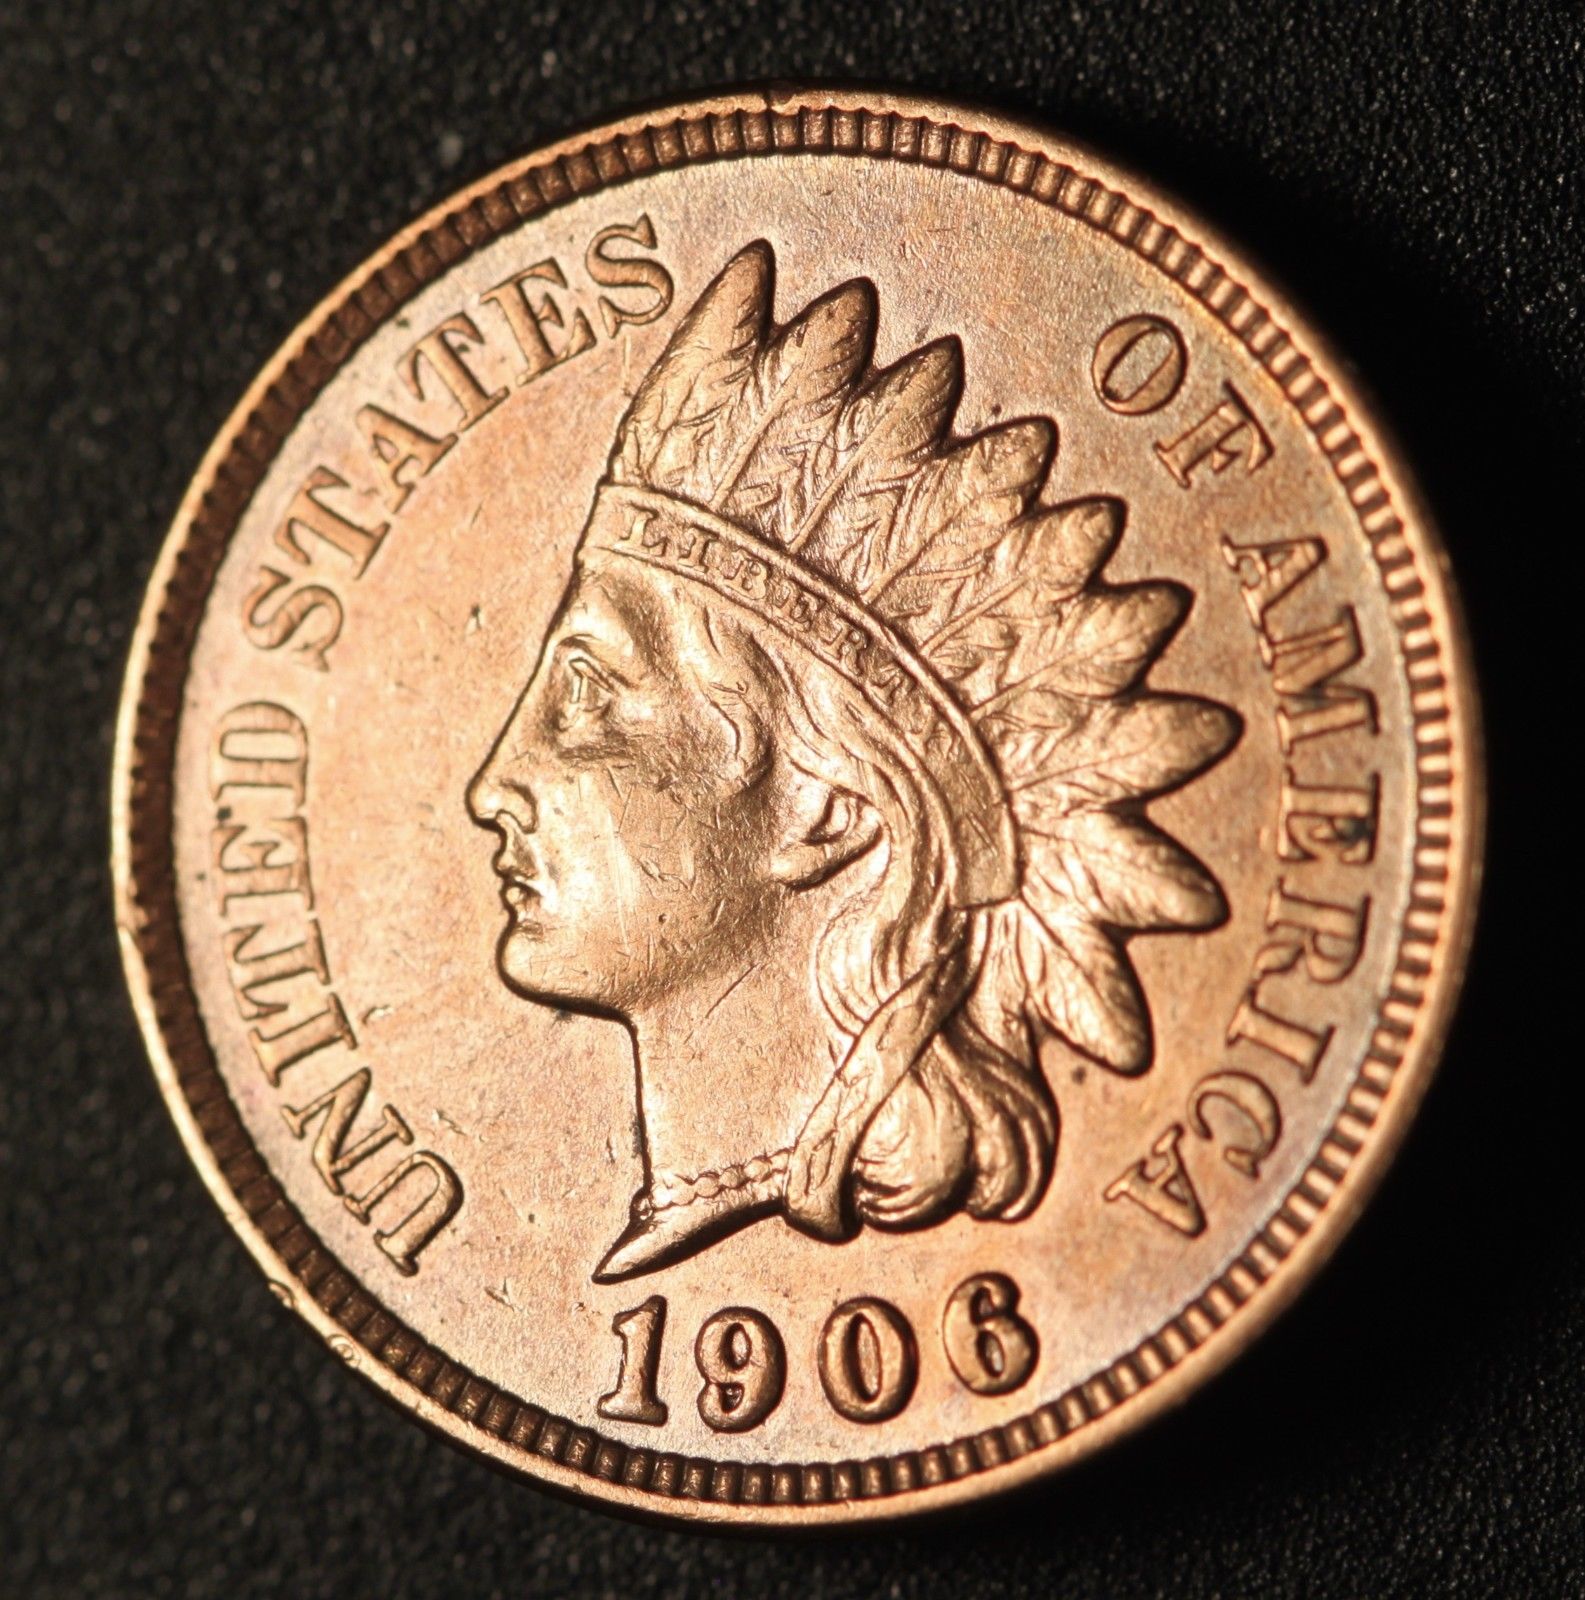 1906 RPD-047 - Indian Head Penny - Photo by Ed Nathanson